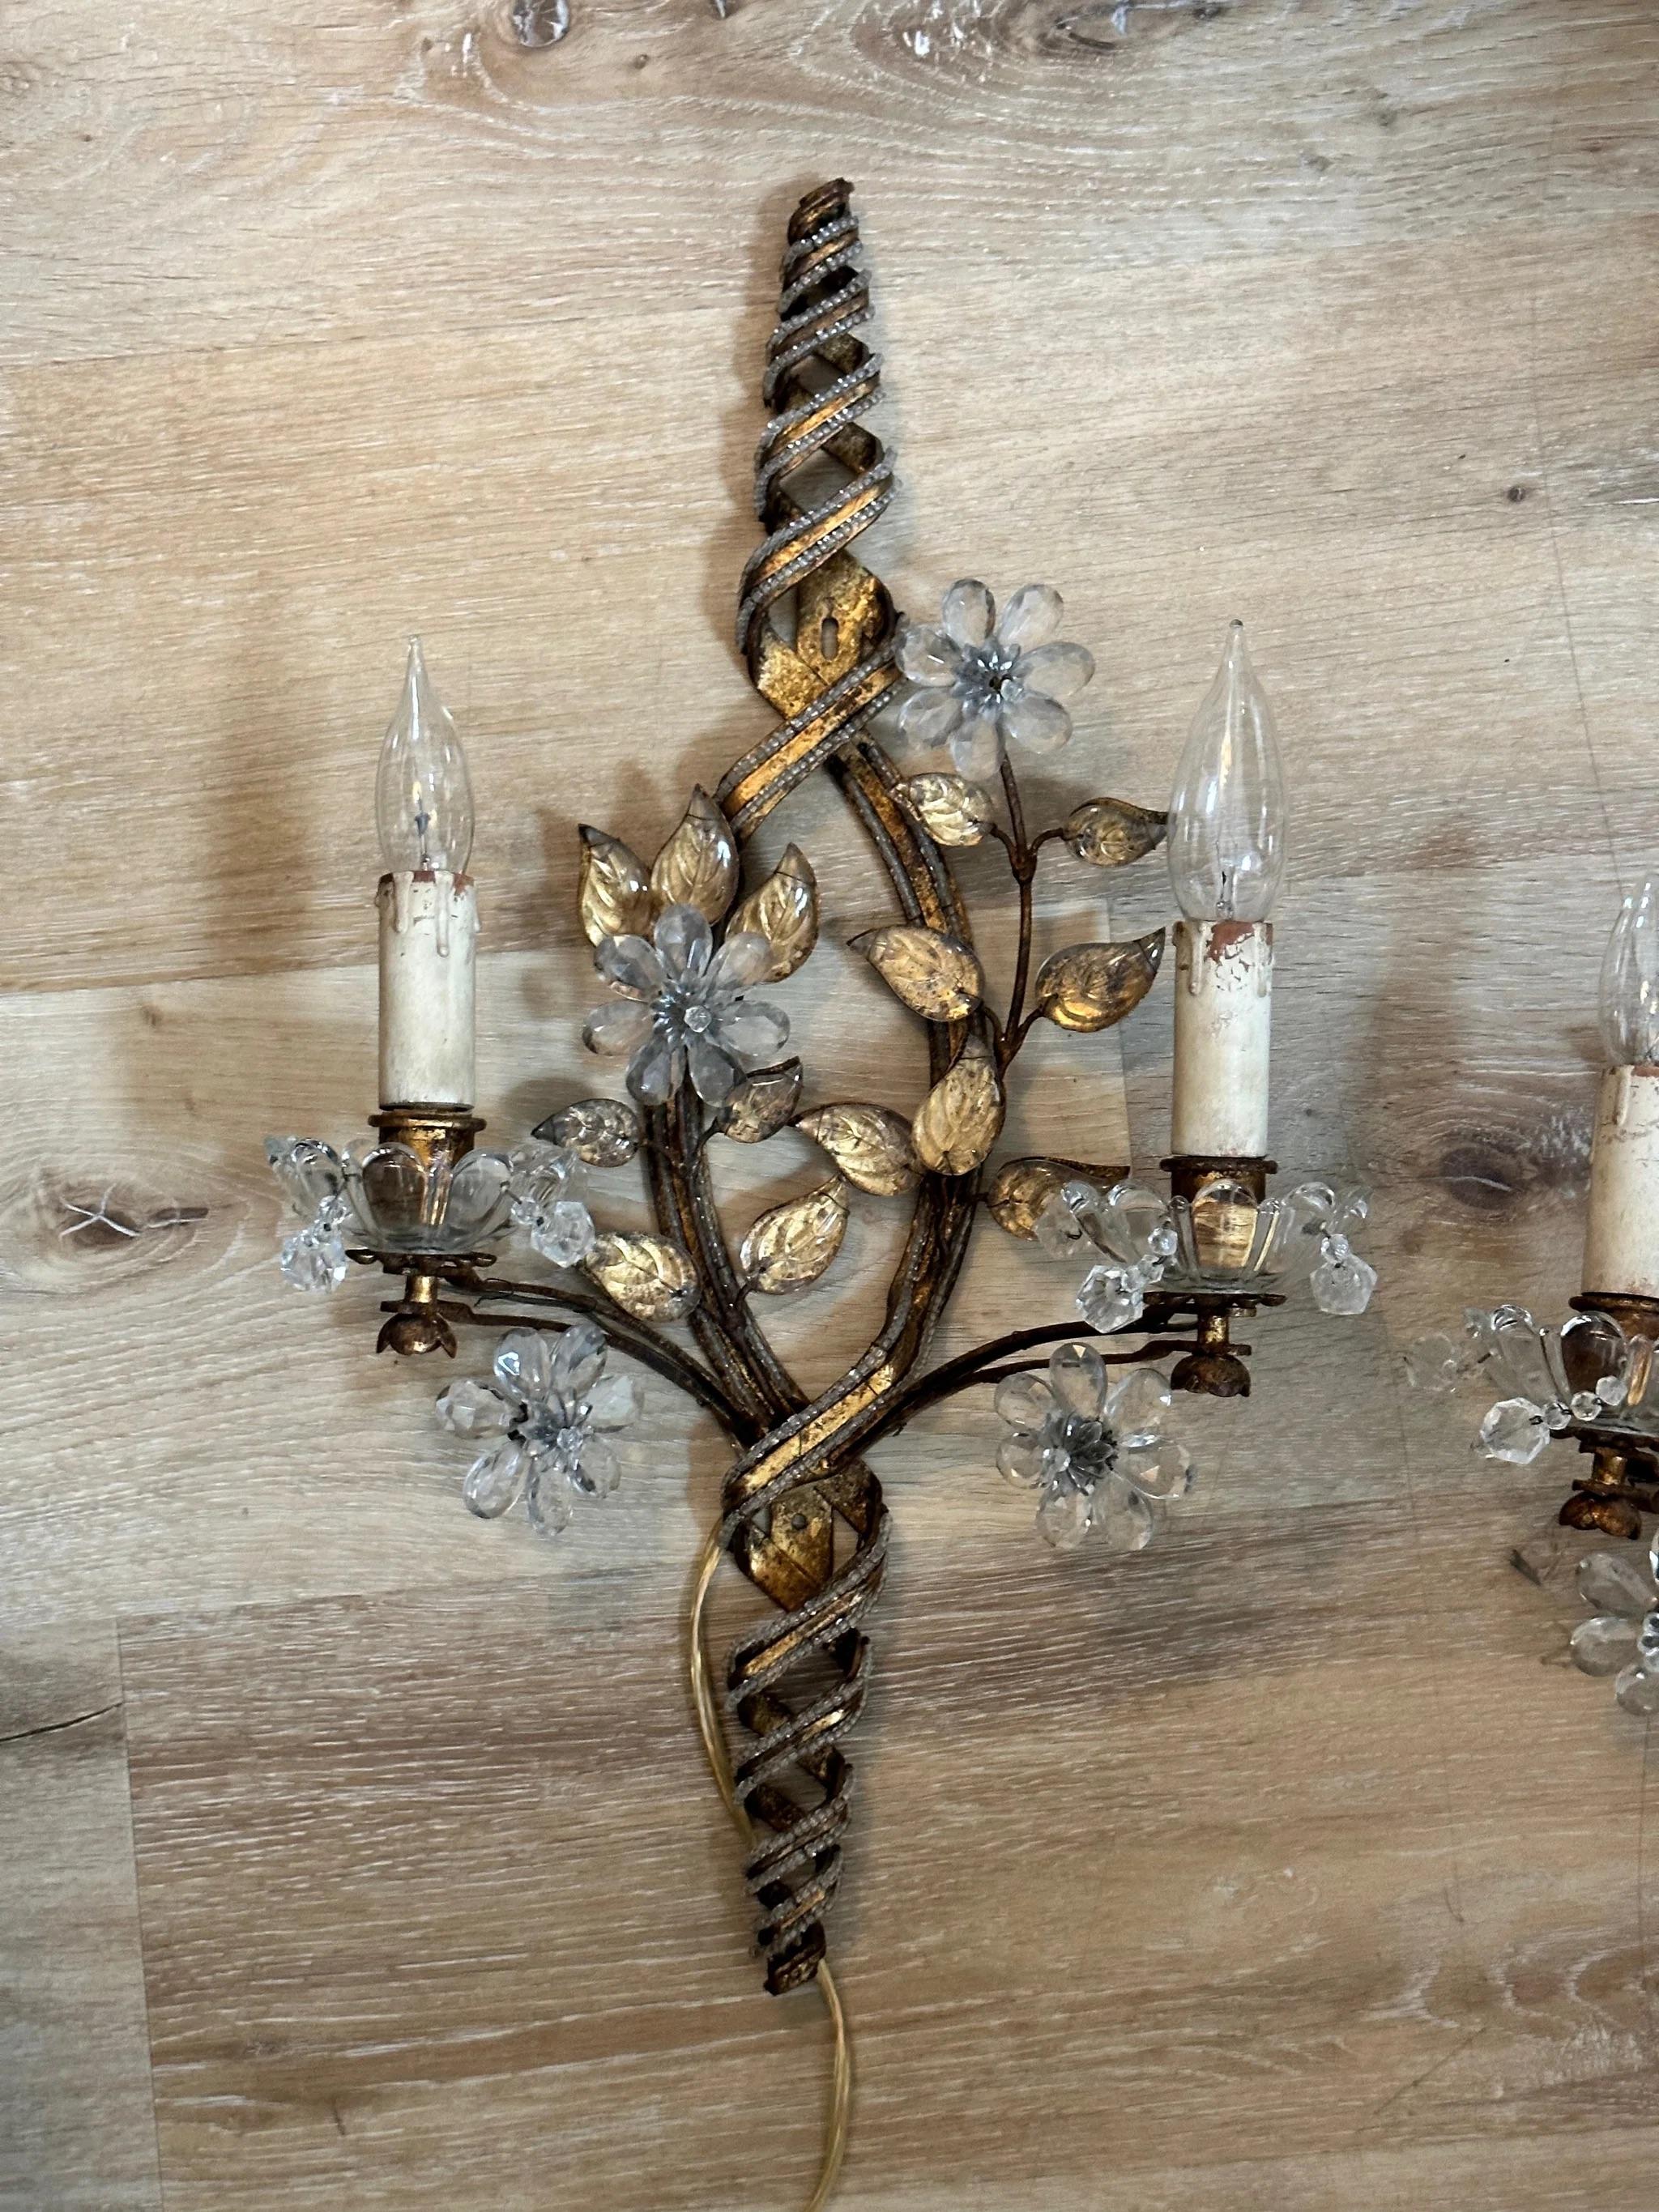 Pair of Mid-Century Two-Light Maison Bagues Sconces c. 1930 In Good Condition For Sale In Charlottesville, VA